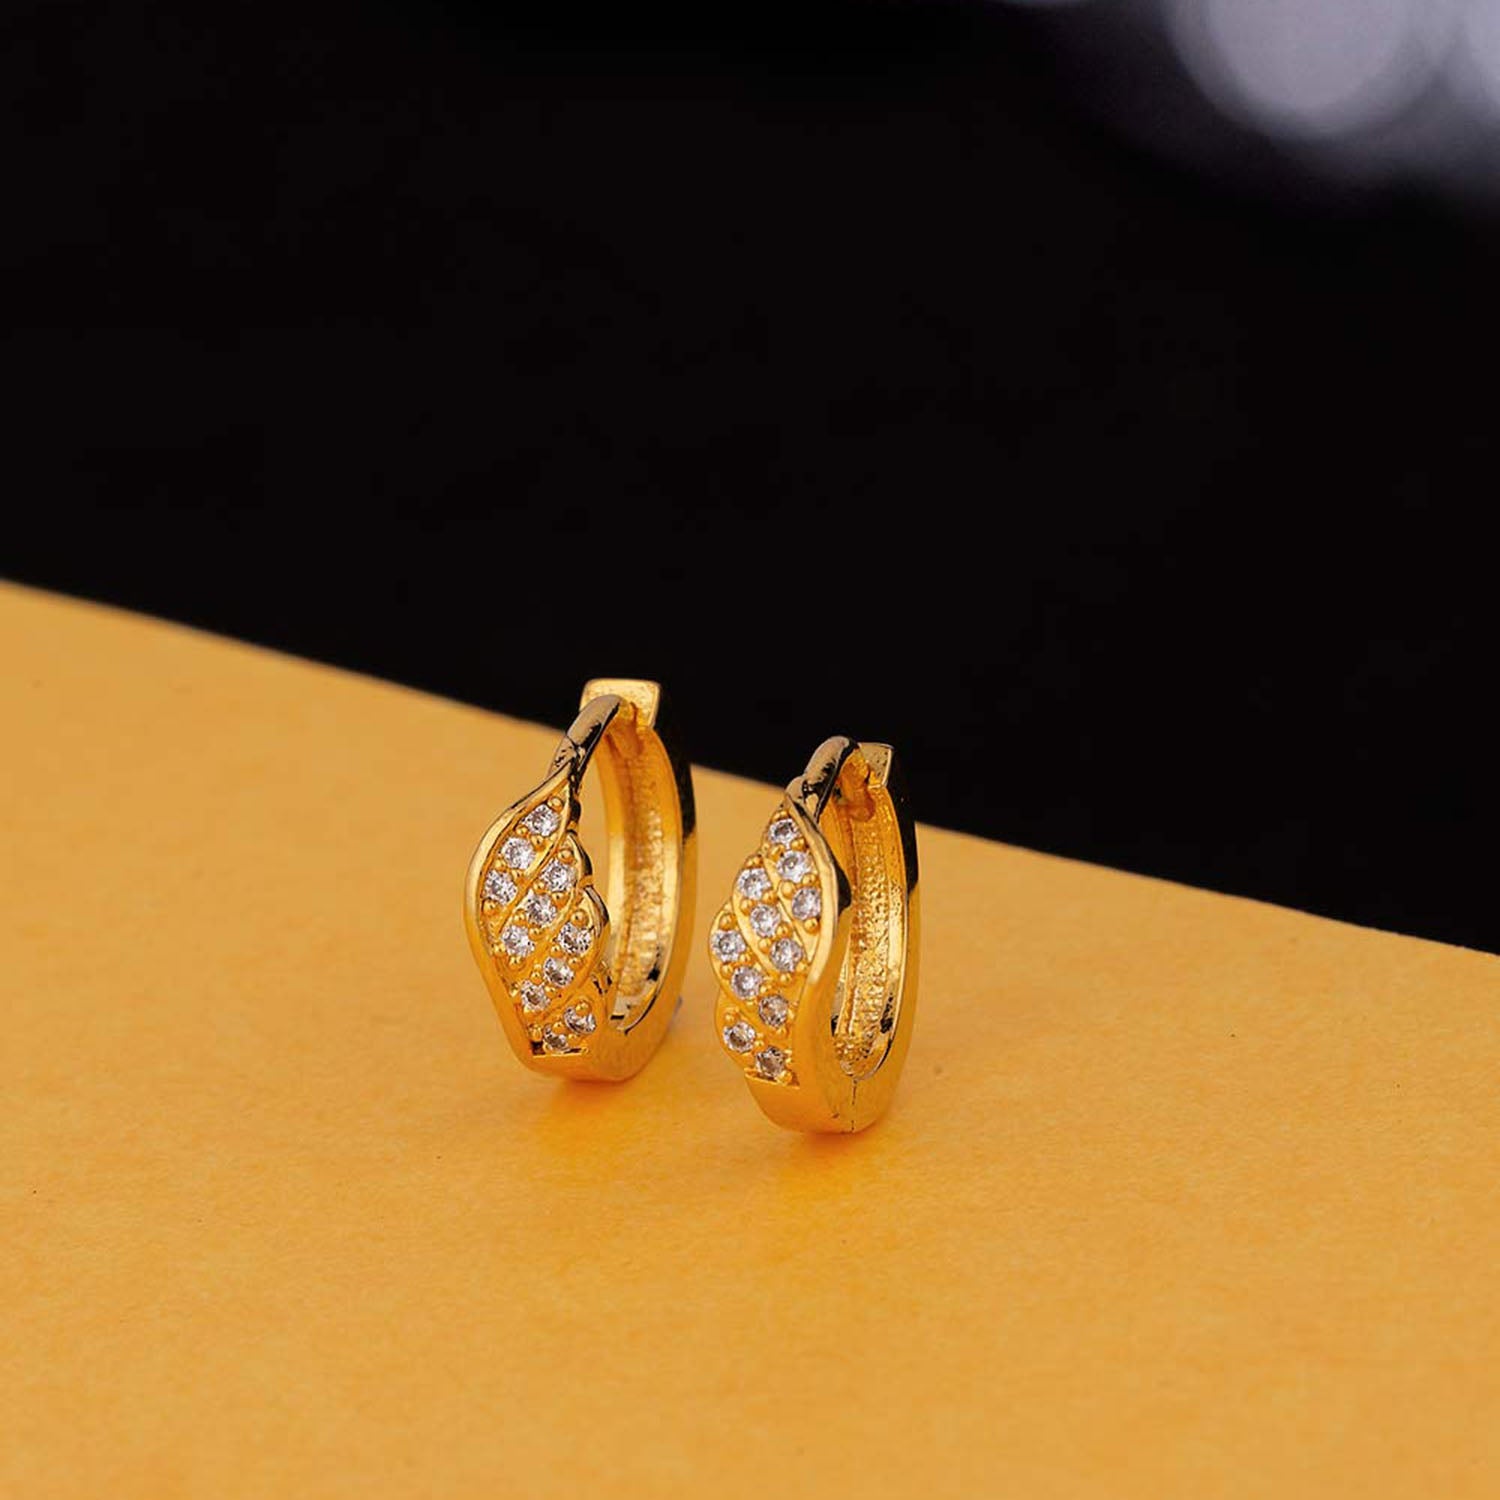 18K Rose Gold Teardrop Ring & Earrings Set With Original Pandora Box Real  925 Silver Womens Wedding Gift With Tear Drop Pear Shaped Ring And Stud  Earring From Planb, $16.66 | DHgate.Com